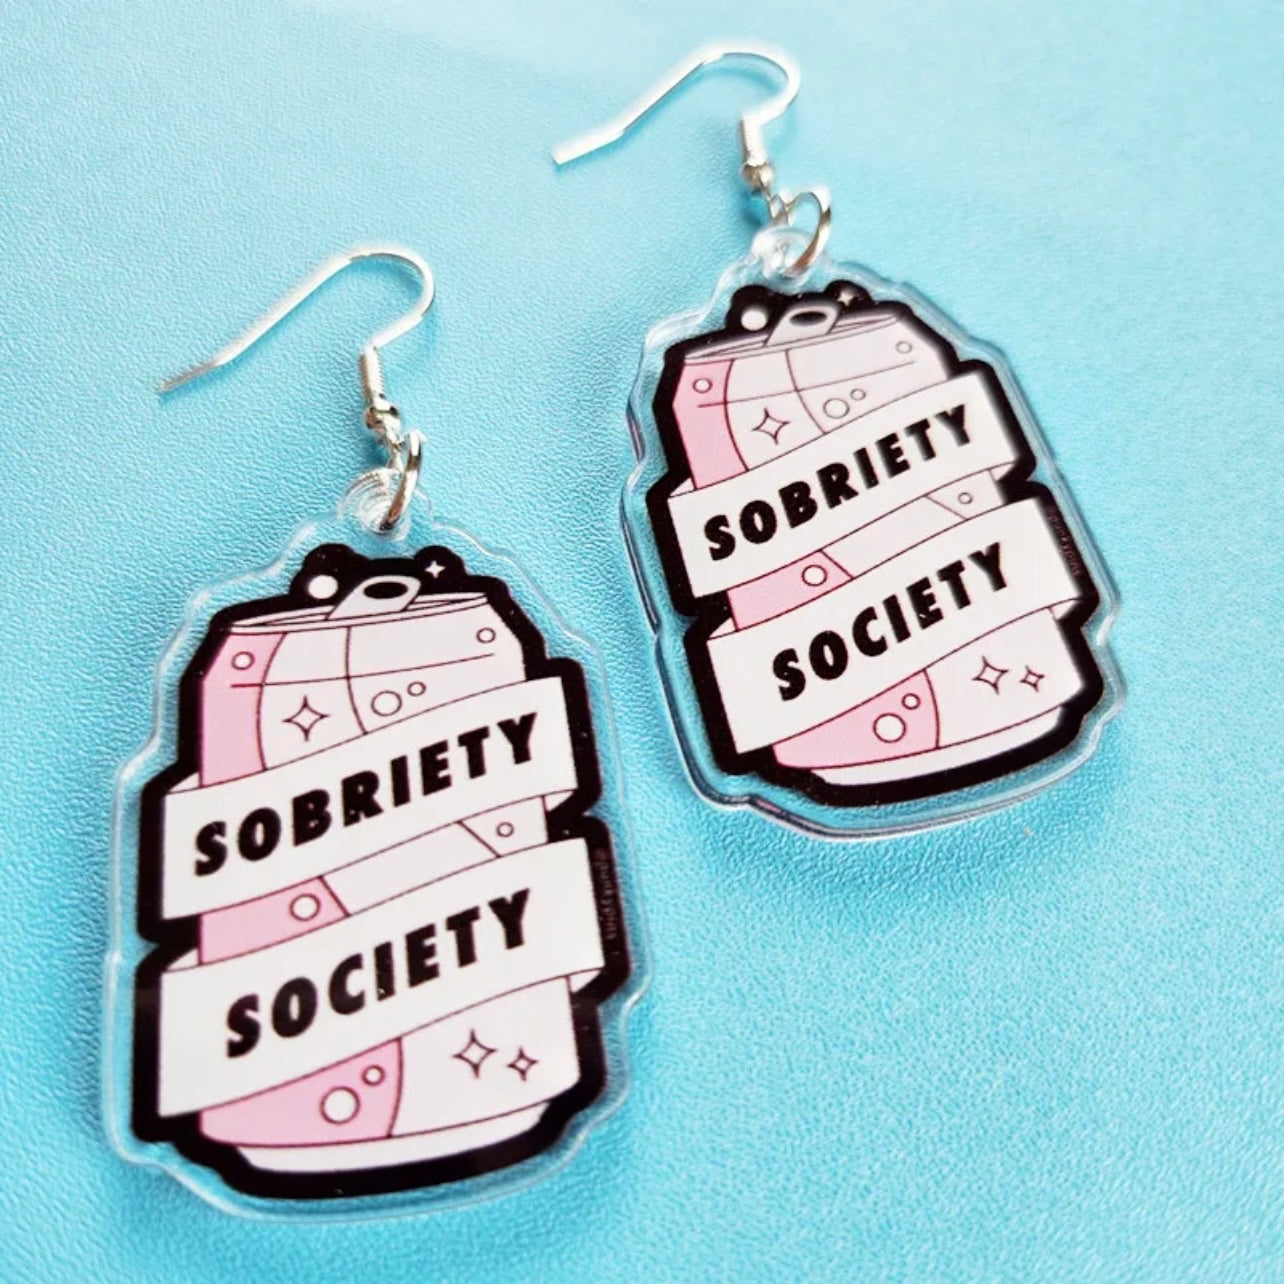 Sobriety Society Earrings - Sober Earrings, Sober Accessories, Handmade Earrings, Mocktail Gift, Alcoholics Anonymous, AA Gift